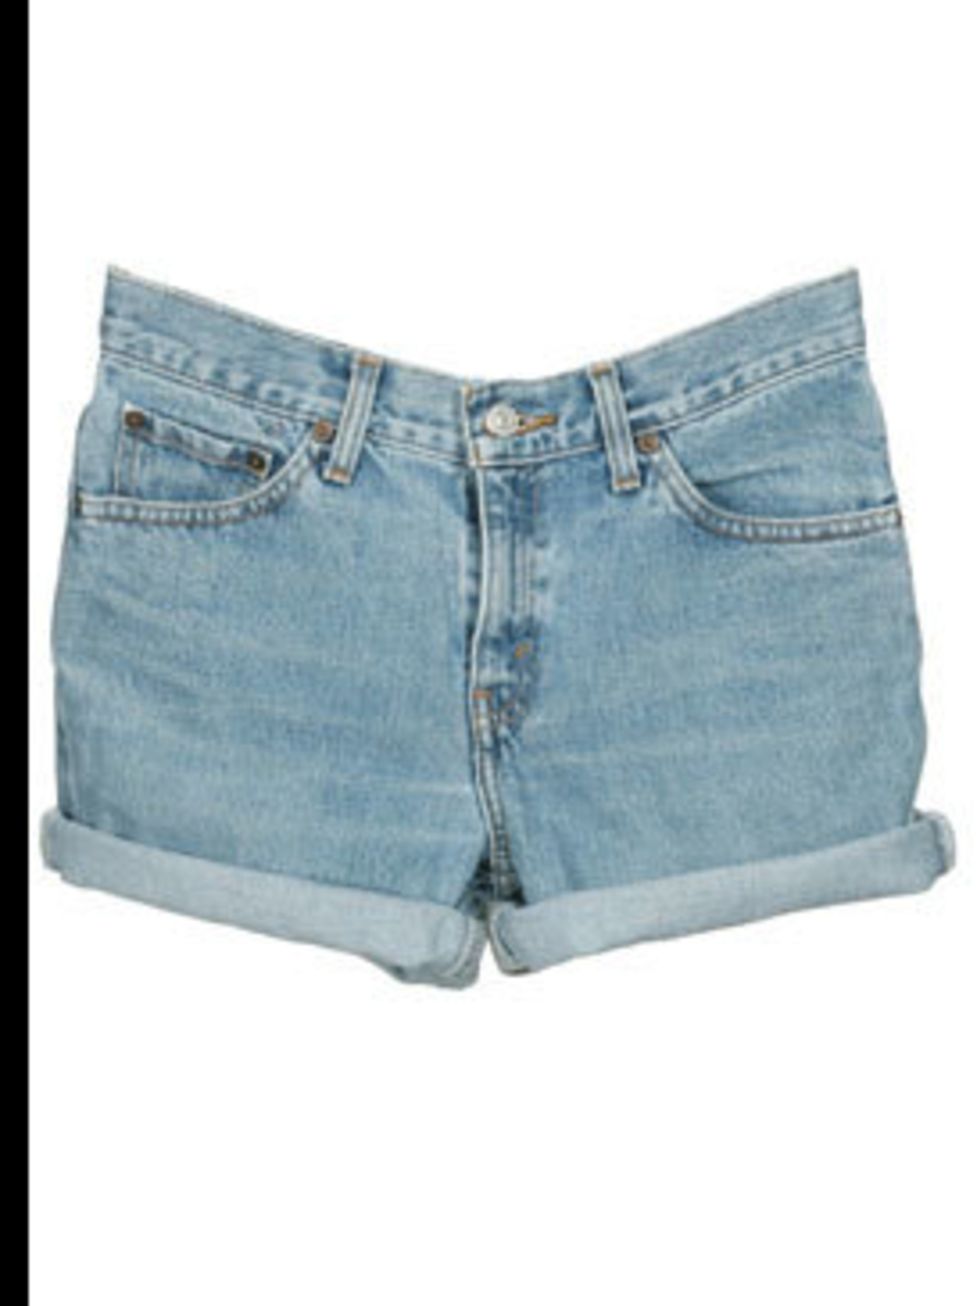 <p>Vintage denim shorts, £10, by Levi's at <a href="http://www.rokit.co.uk/product.php?product_id=WC250181">Rokit</a></p>